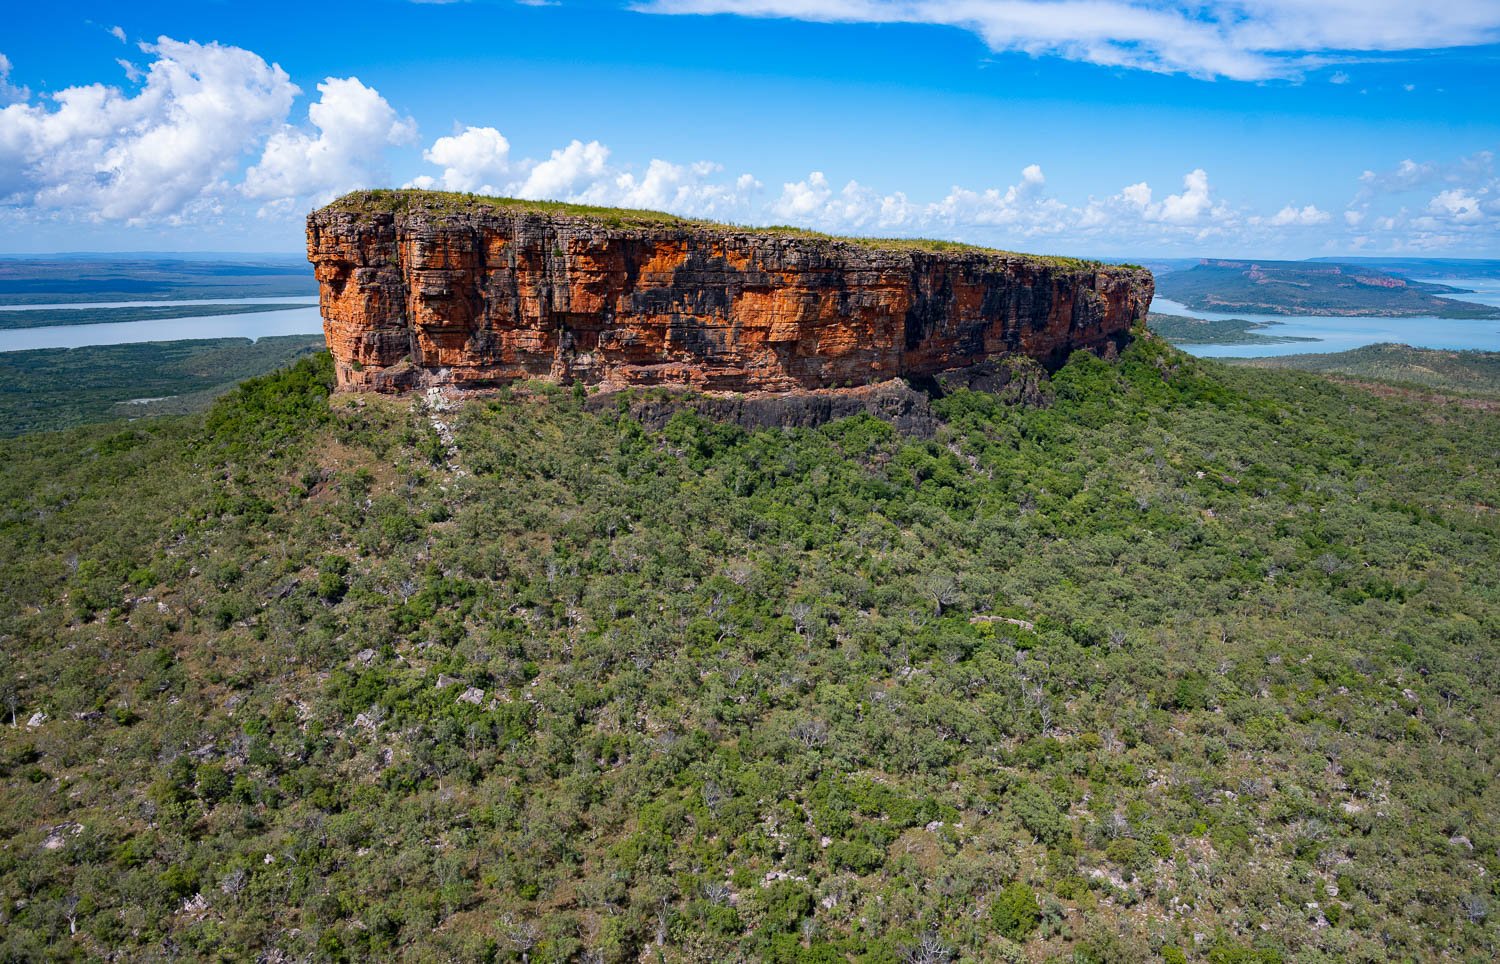 A long mountain wall in the middle of a long green area, Mount Trafalgar, The Kimberley, Western Australia